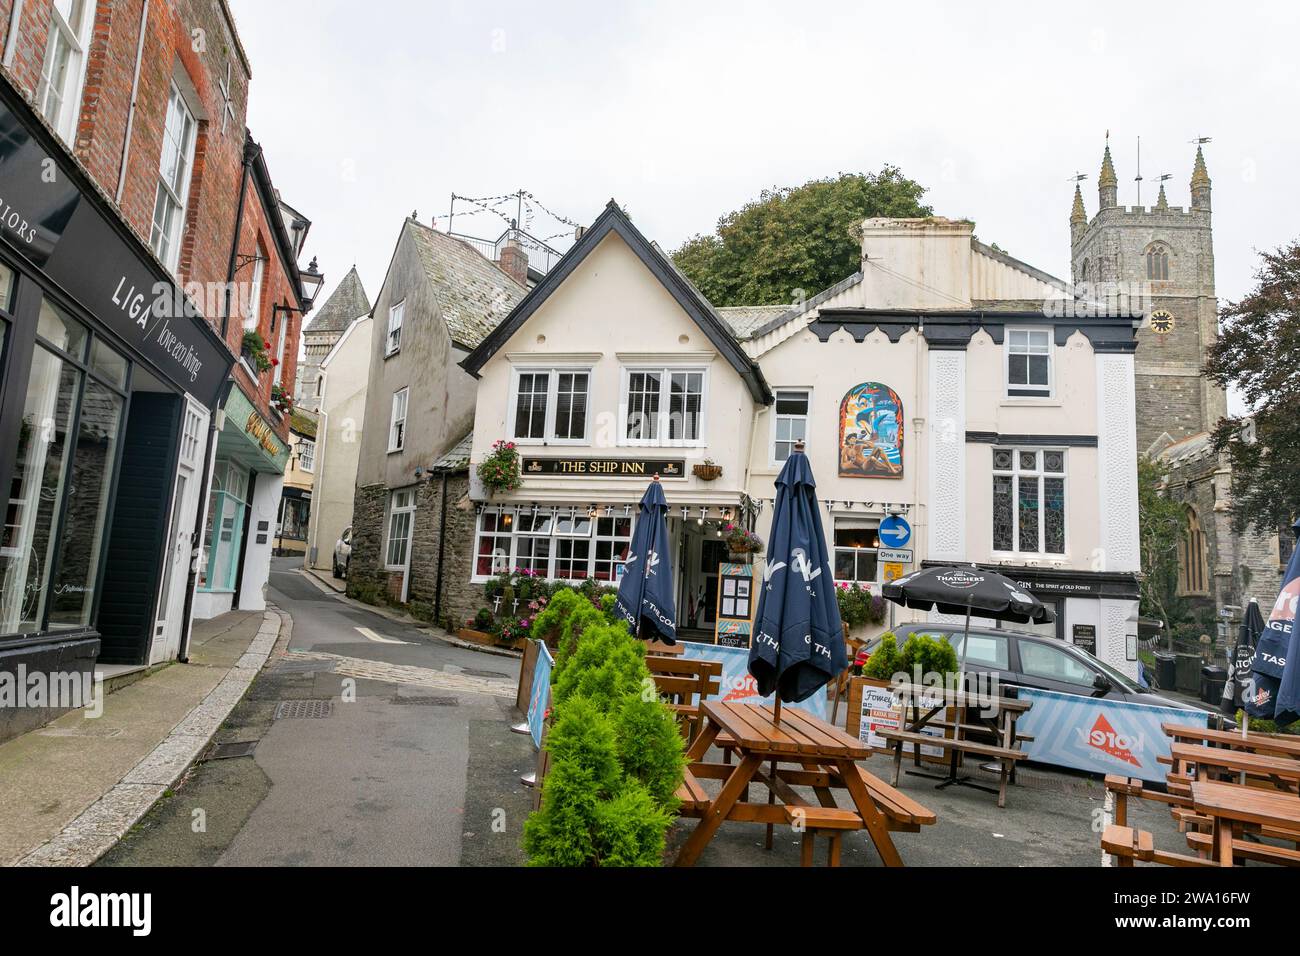 Fowey in Cornwall England, and the Ship Inn public house built in 1435 which sells ales and Cornish lager Korev, England,UK,2023 Stock Photo